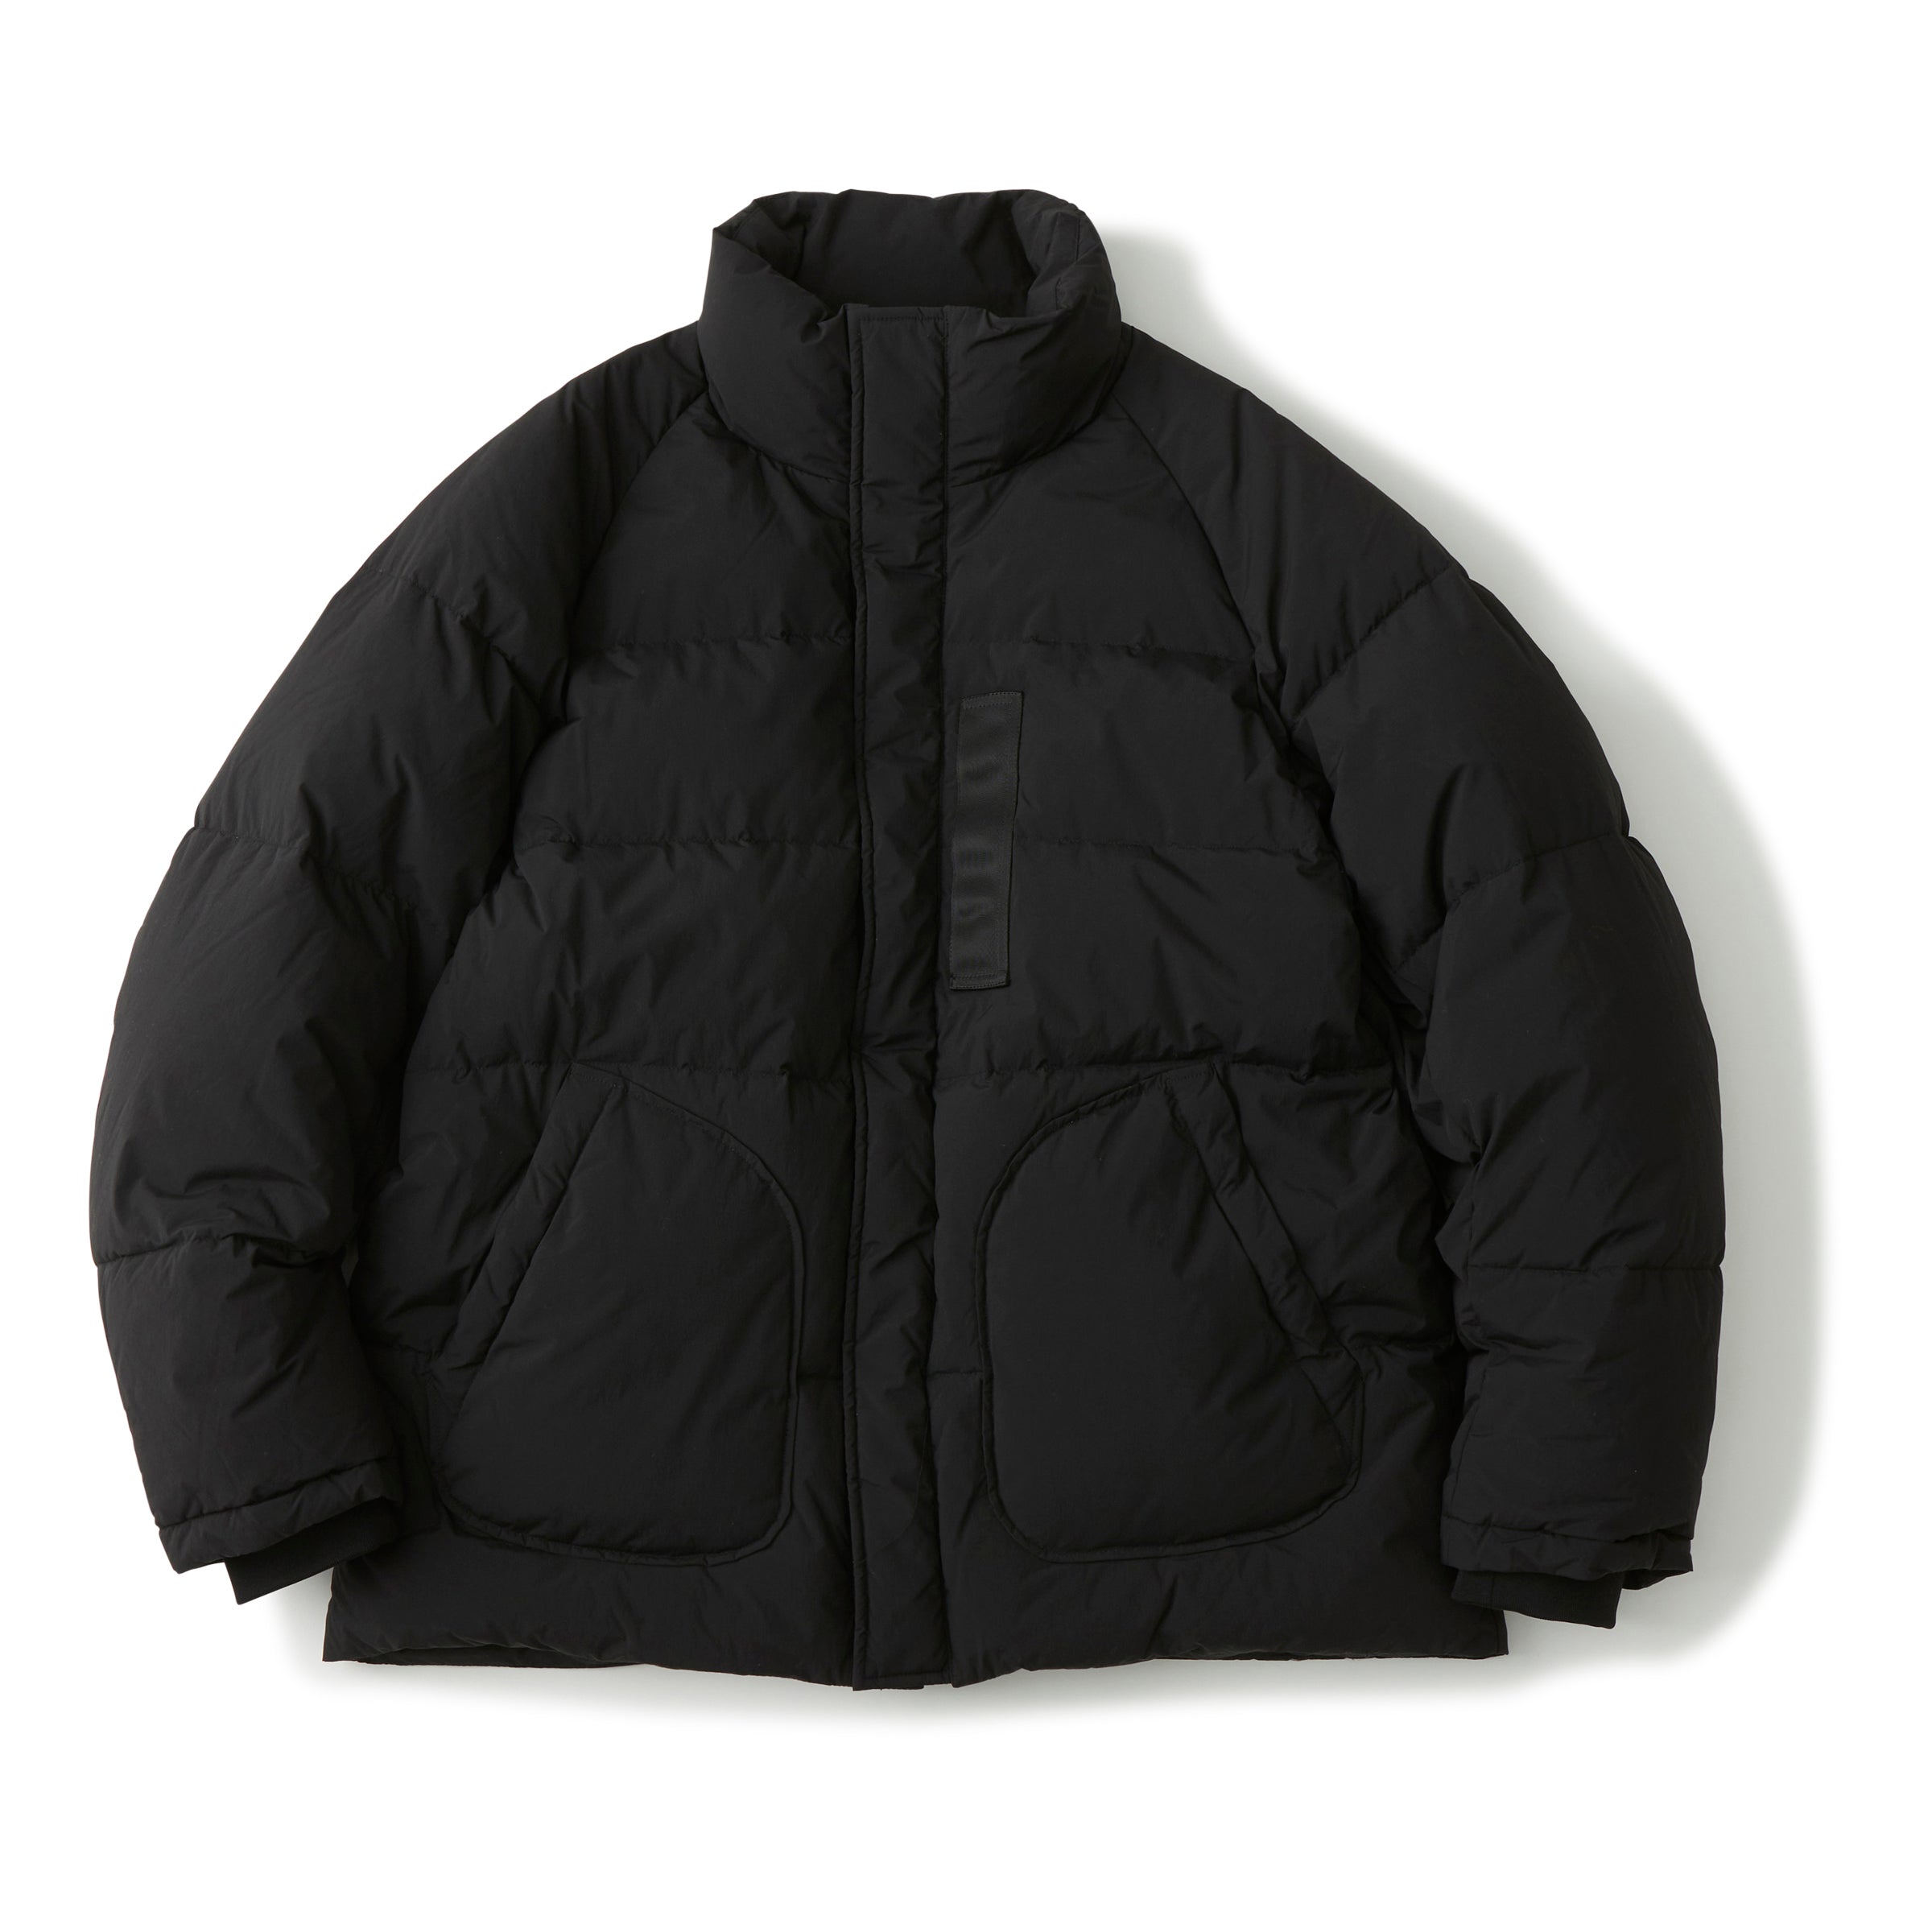 WM×TAION DOWN JACKET – White Mountaineering OFFICIAL WEB SITE.